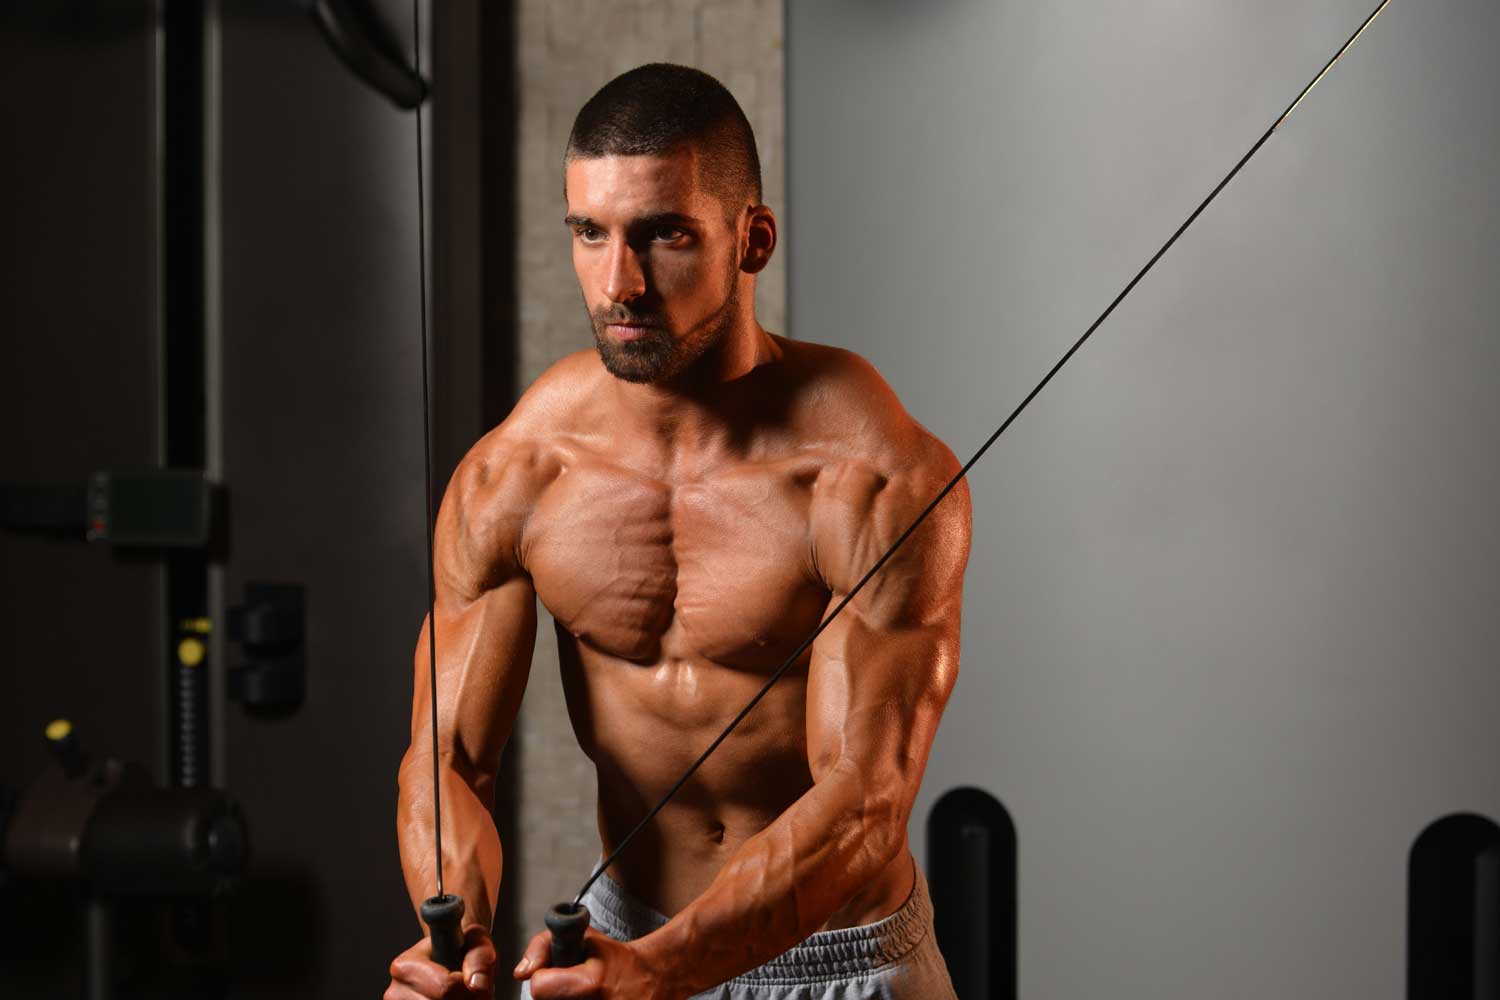 This Workout Breathing Technique Could Increase Your Gains